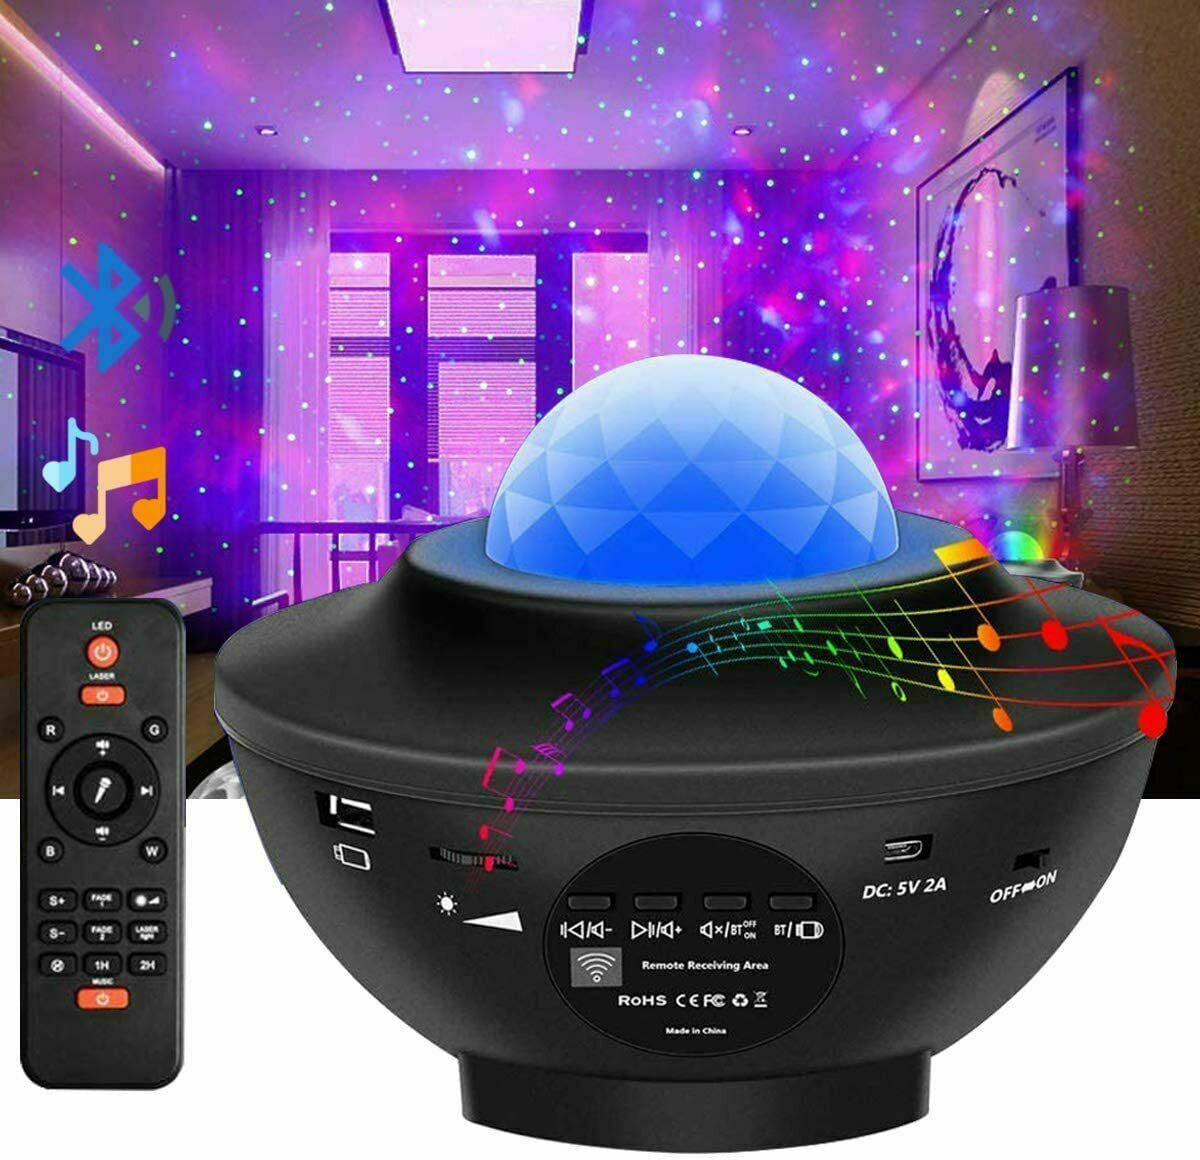 LED Galaxy Starry Night Light Projector Lamp Ocean Star Sky Party Speaker Remote 